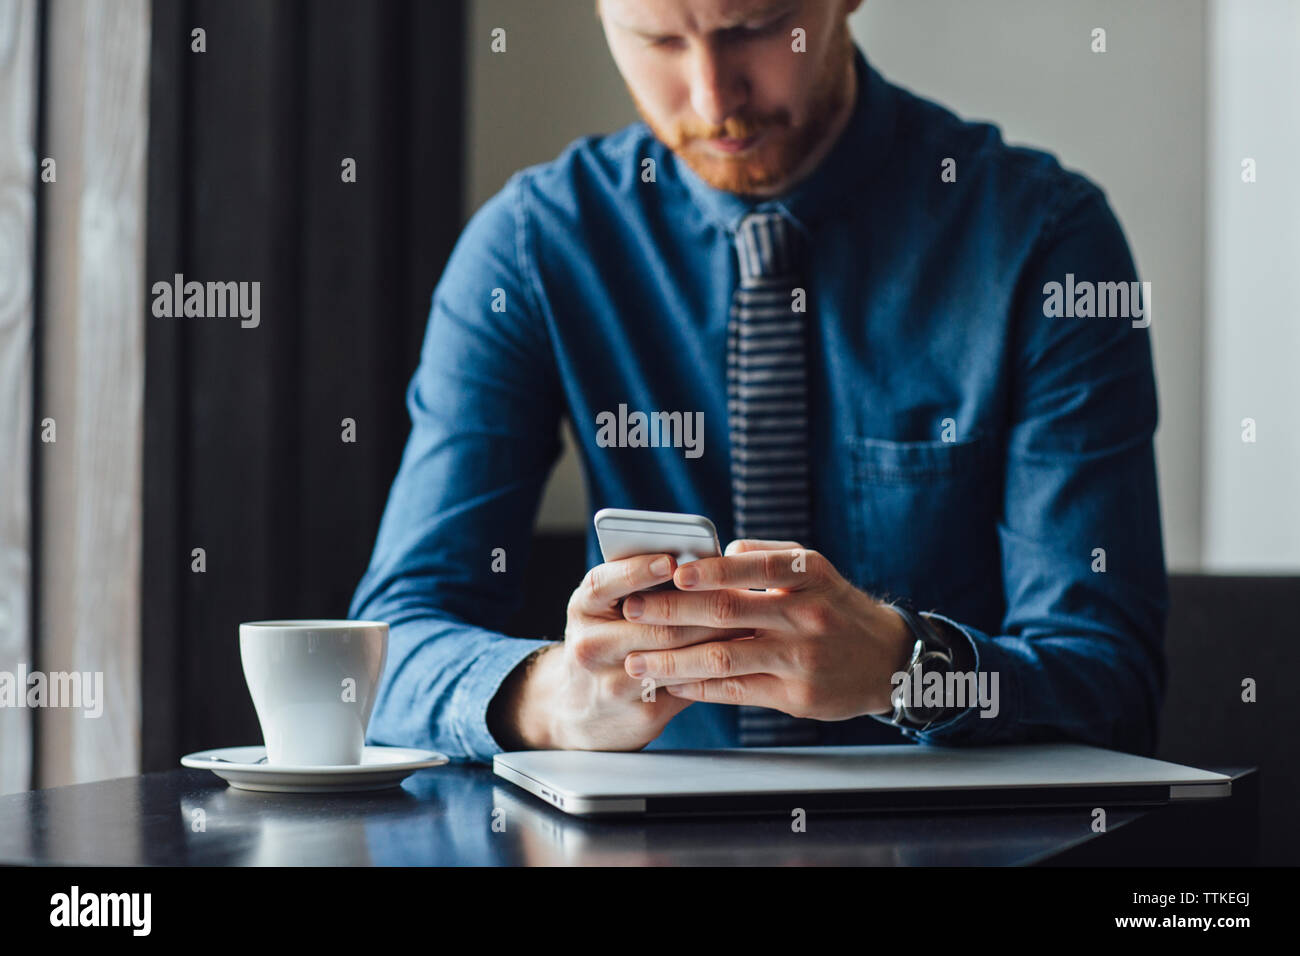 businessman using smart phone while sitting at restaurant table Stock Photo